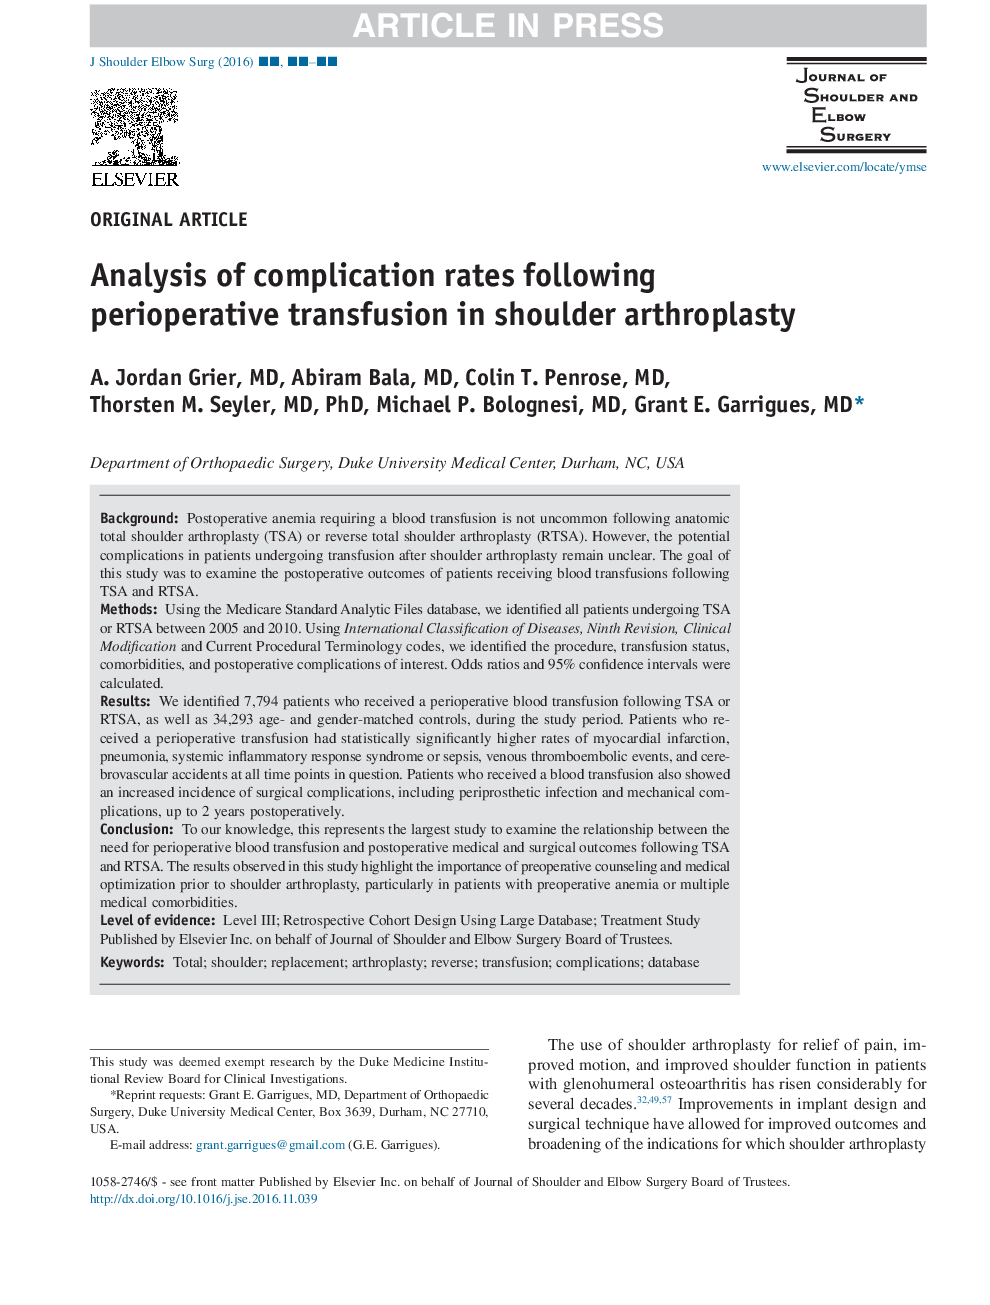 Analysis of complication rates following perioperative transfusion in shoulder arthroplasty